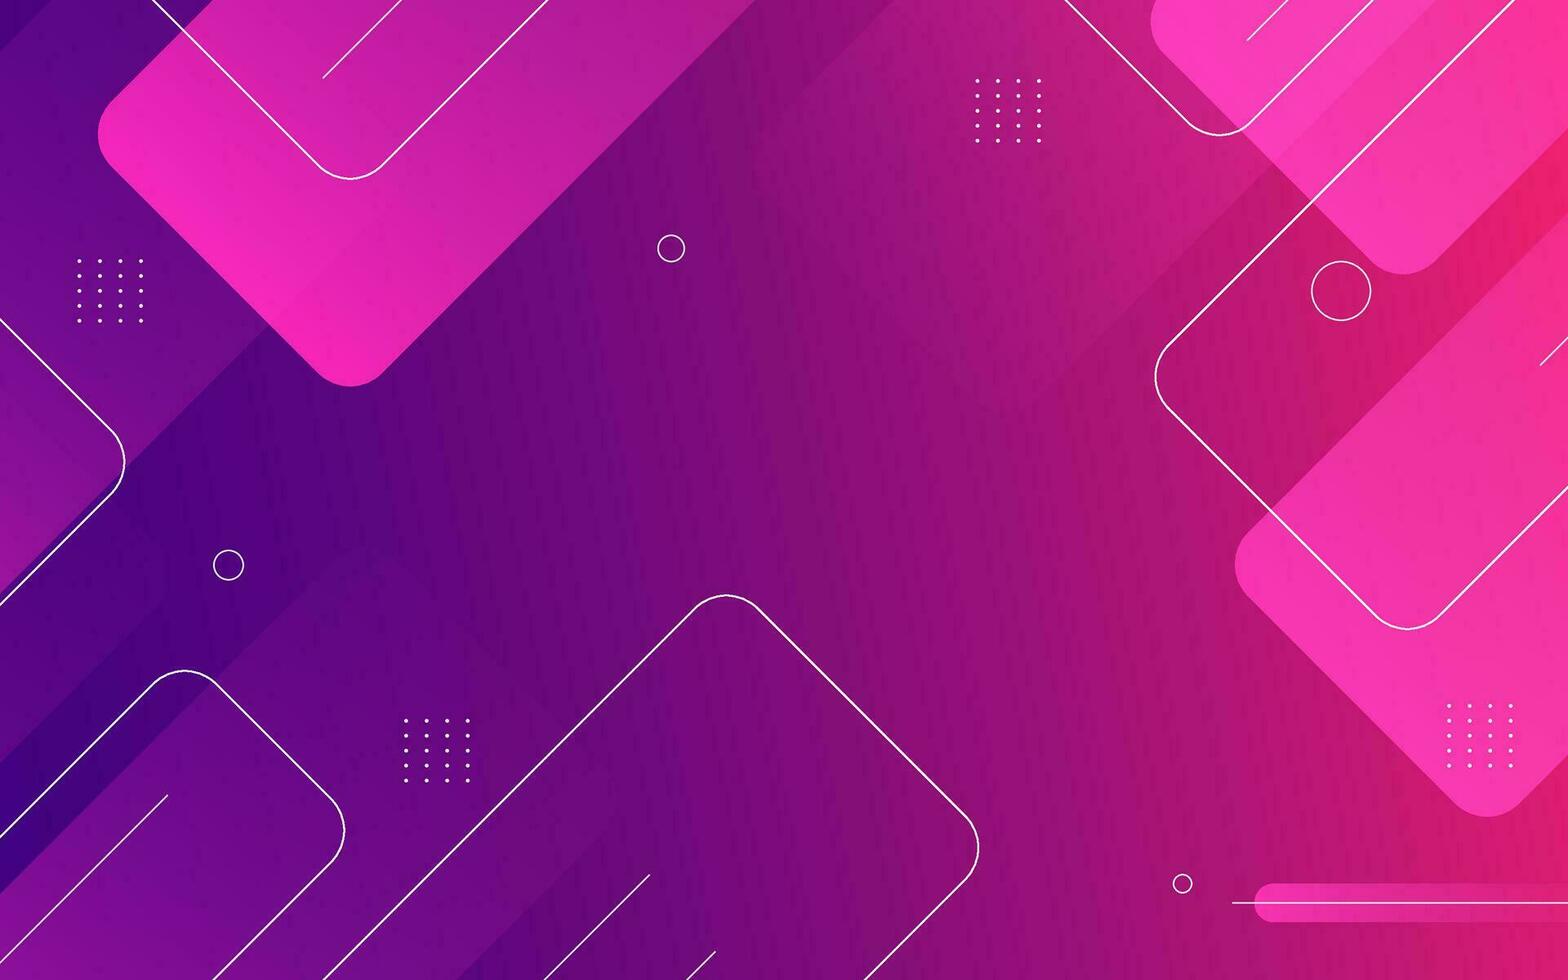 Modern background, geometric style, pink and blue gradation, squares, lines, Memphis abstract vector